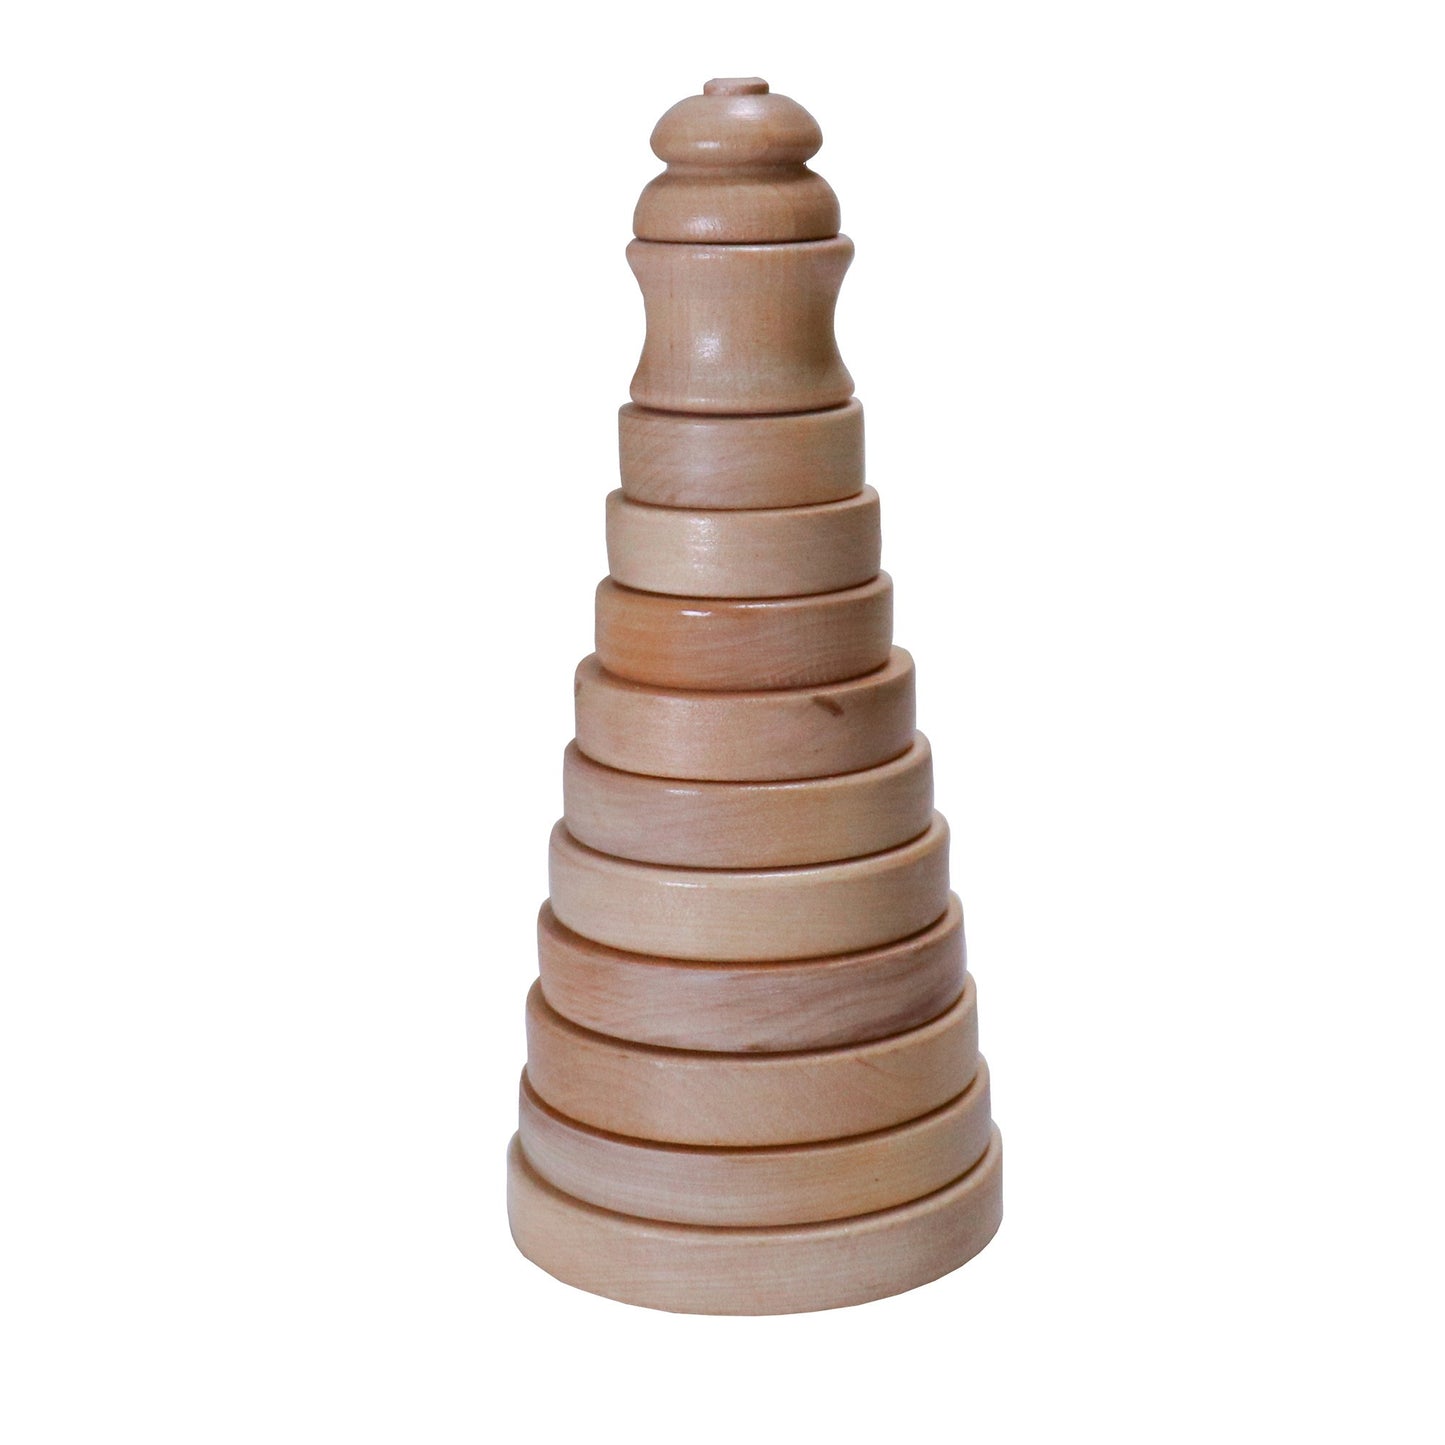 Wooden Stacking Toy - Natural